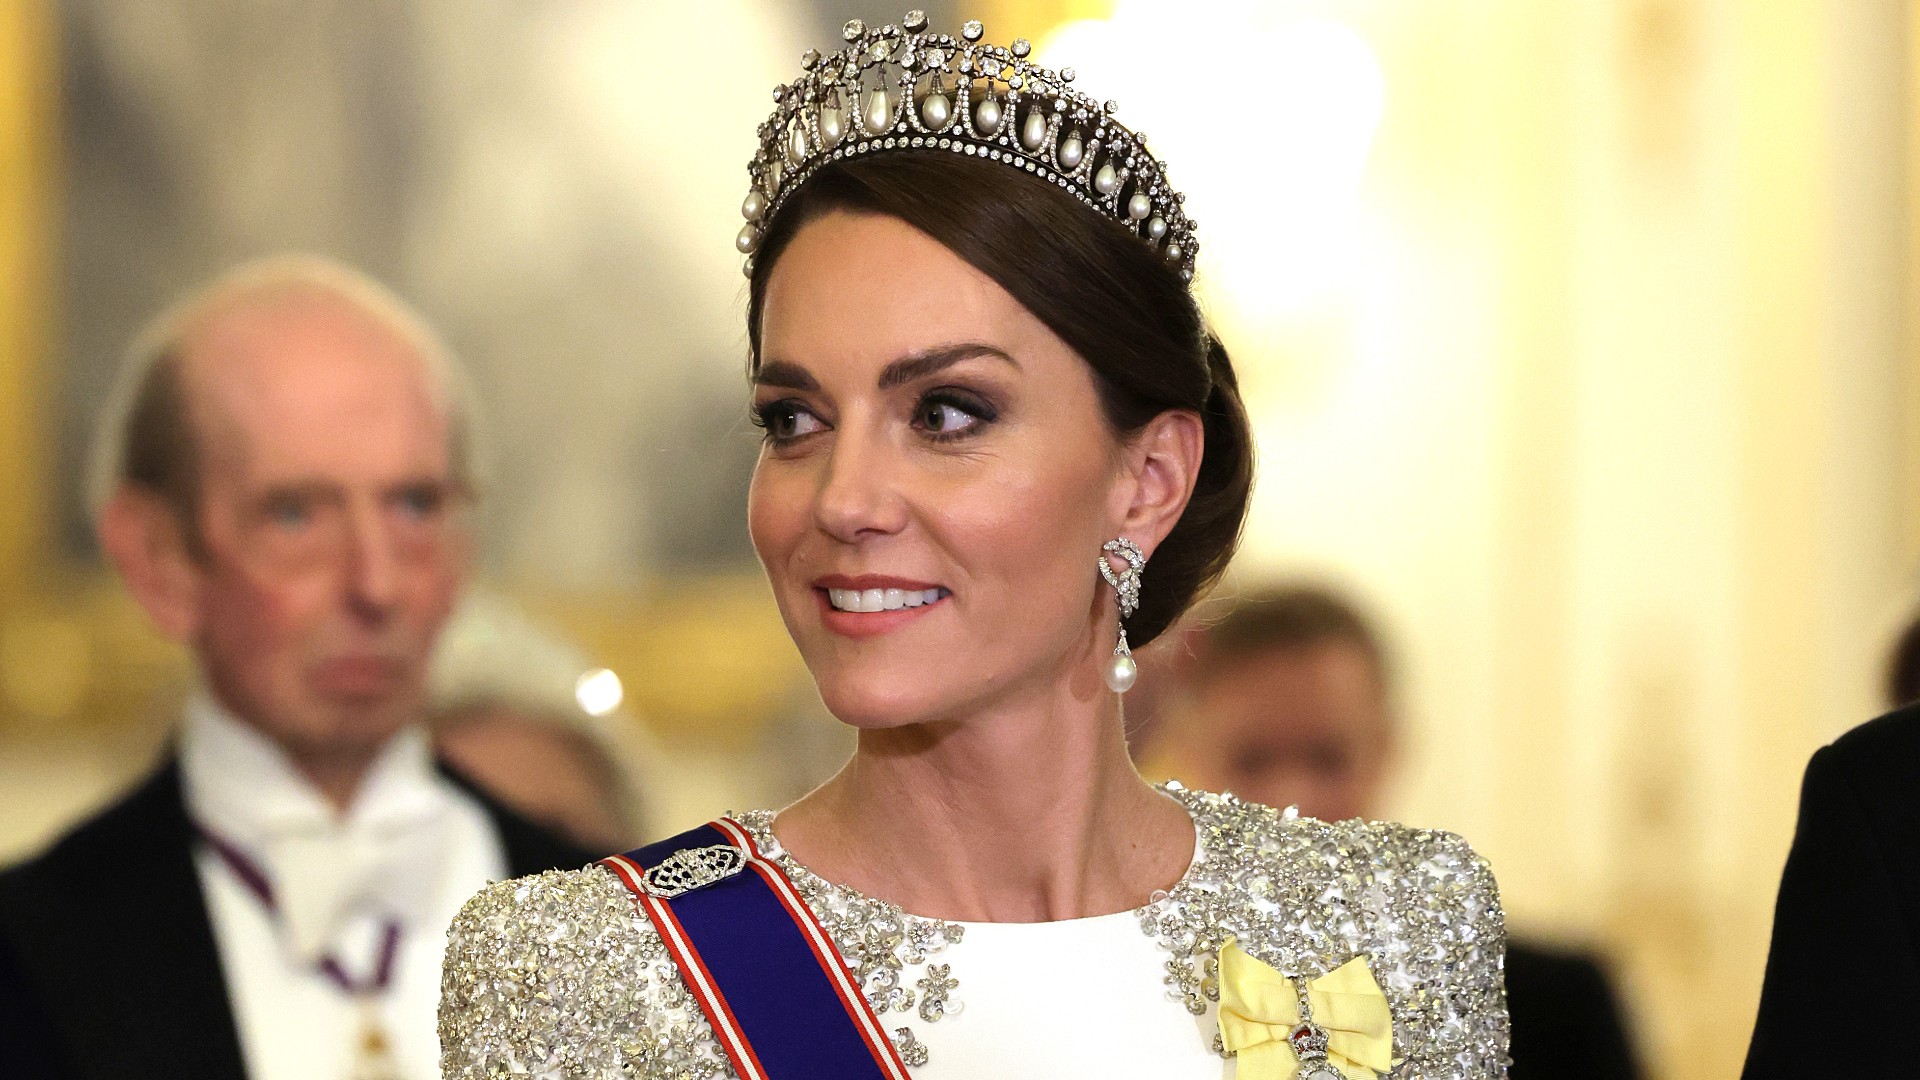 Kate Middleton Went Full Fairytale Princess in a Tiara and Bedazzled Gown for King Charles' First State Banquet